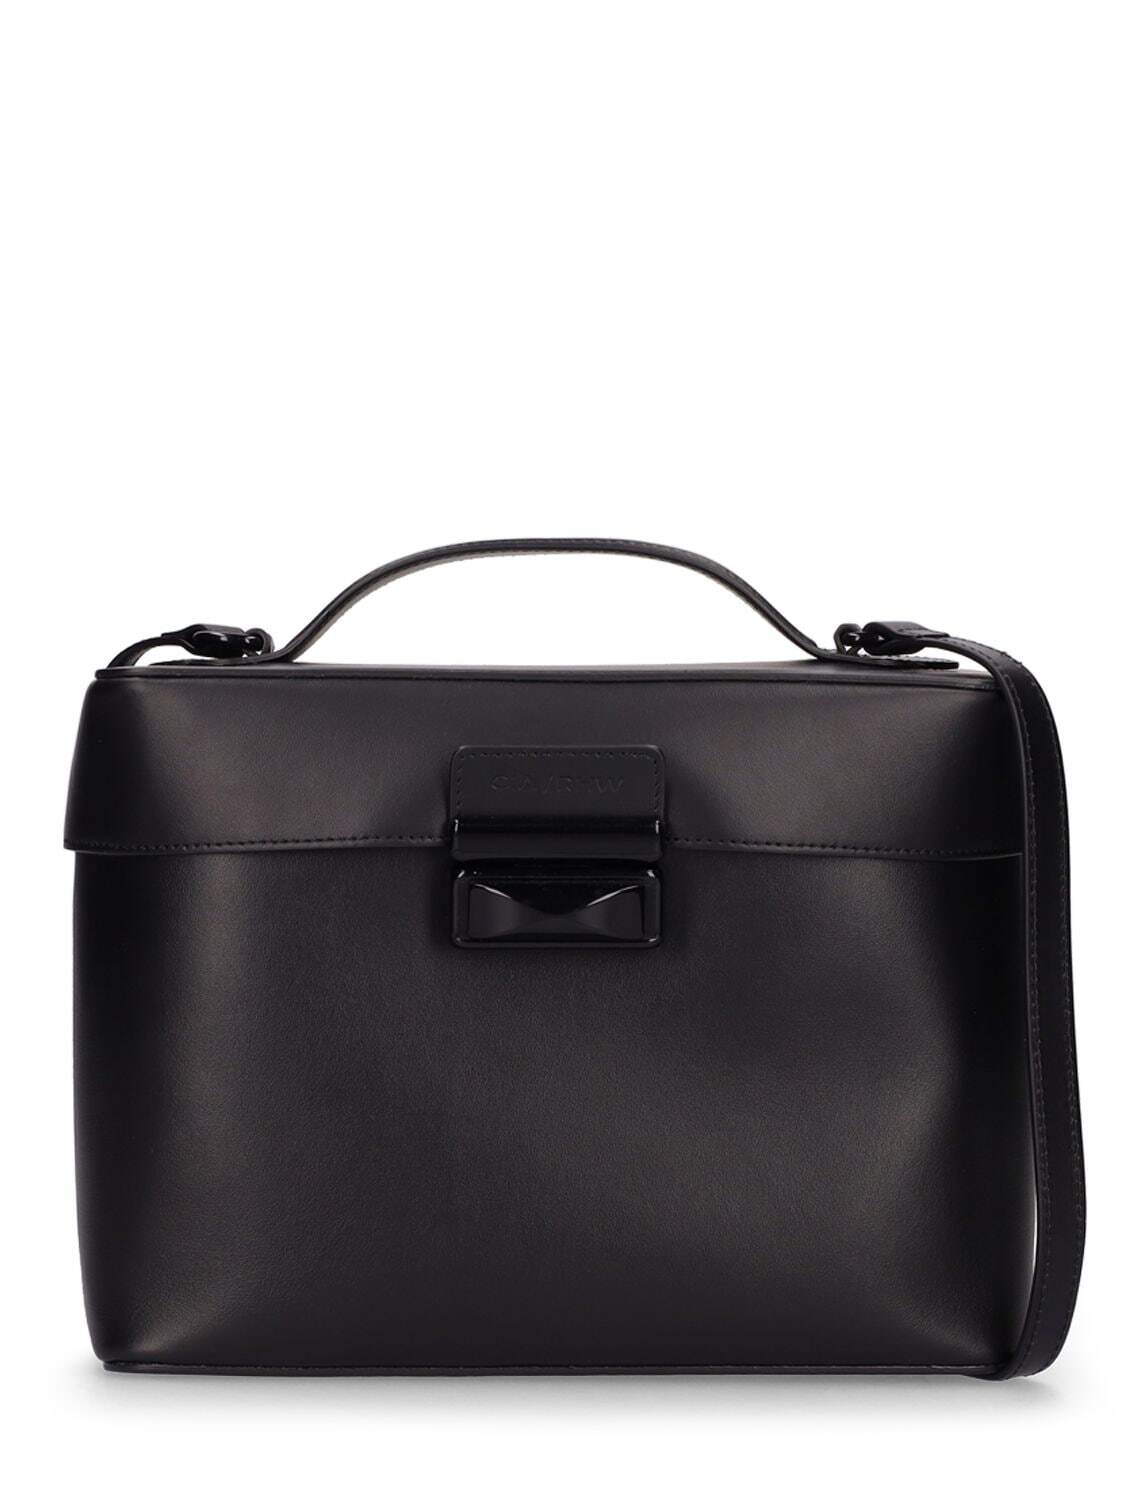 GIA X RHW Doctor Leather Top Handle Bag in black